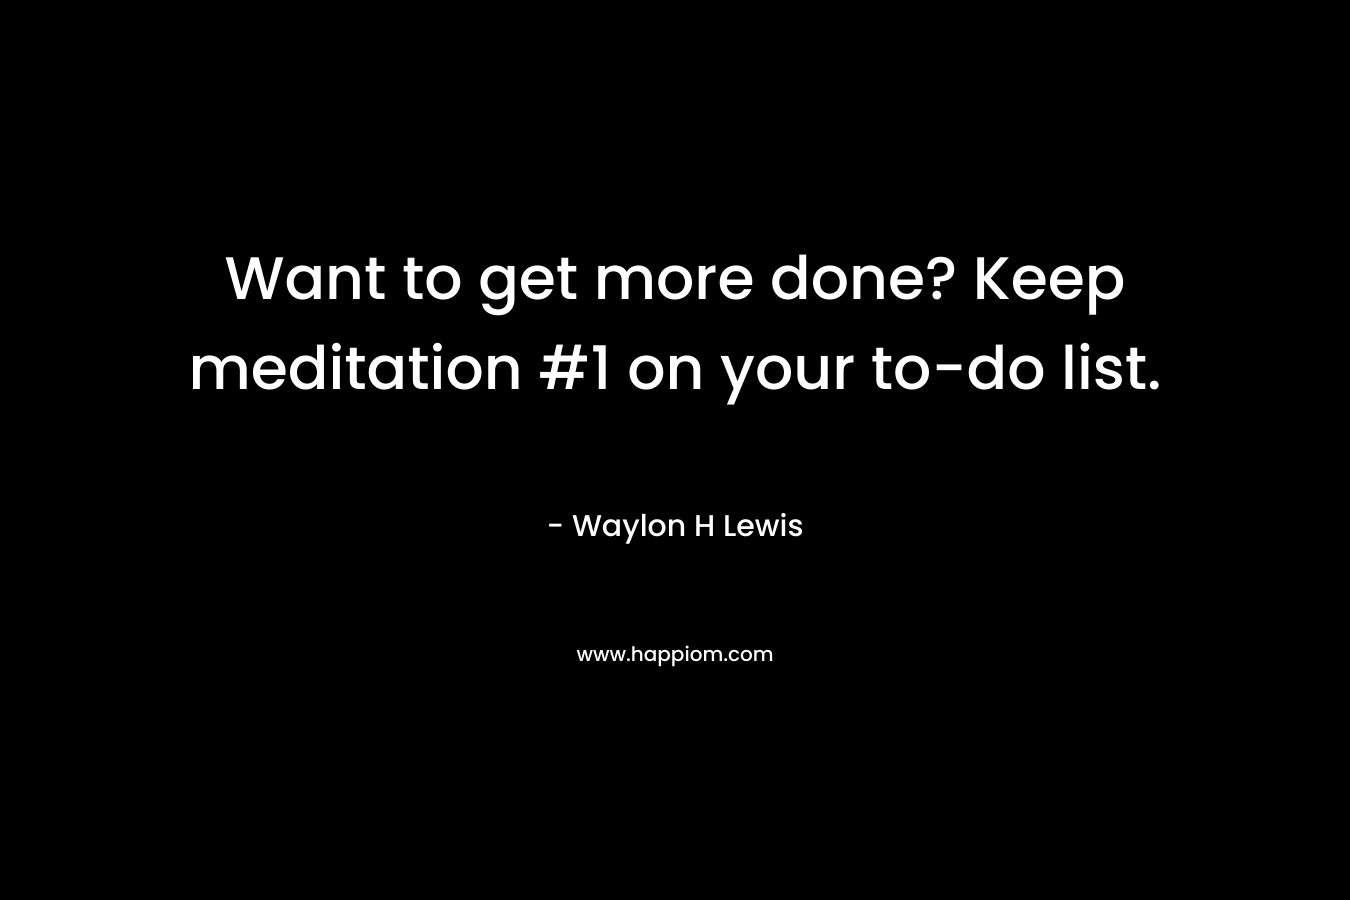 Want to get more done? Keep meditation #1 on your to-do list.